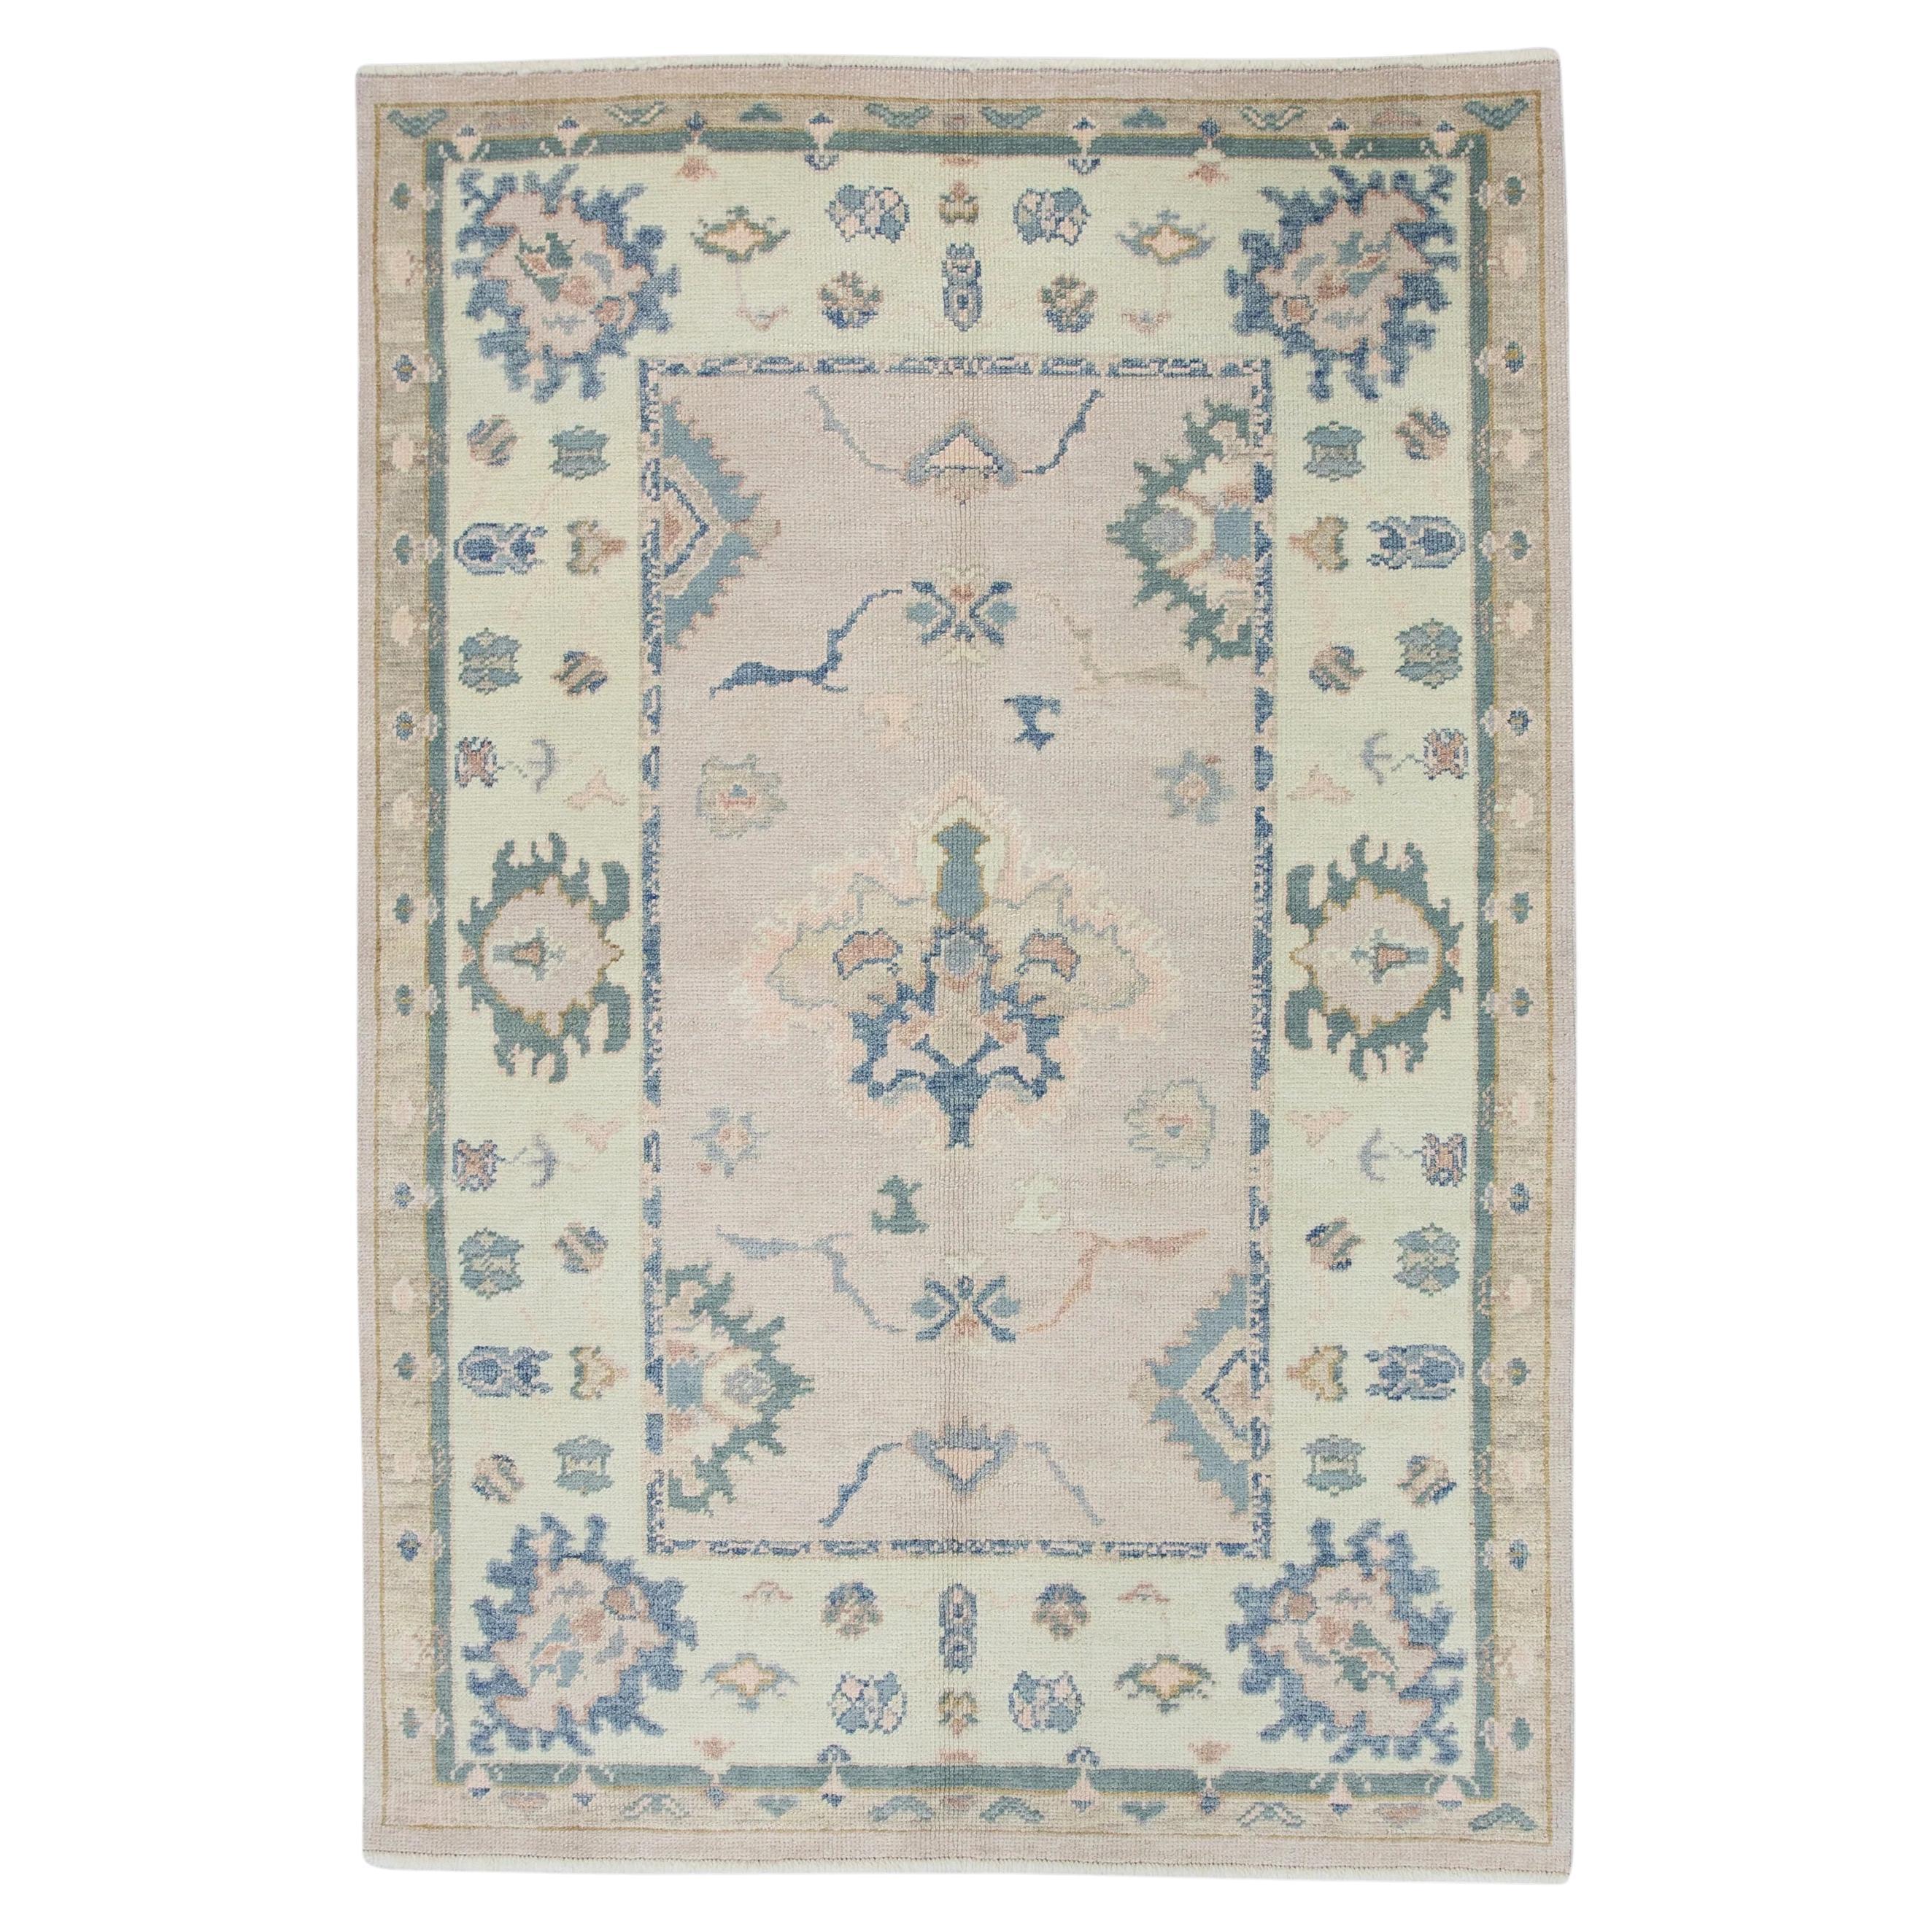 Soft Pink Handwoven Wool Turkish Oushak Rug in Blue Floral Pattern 4'11" x 7'